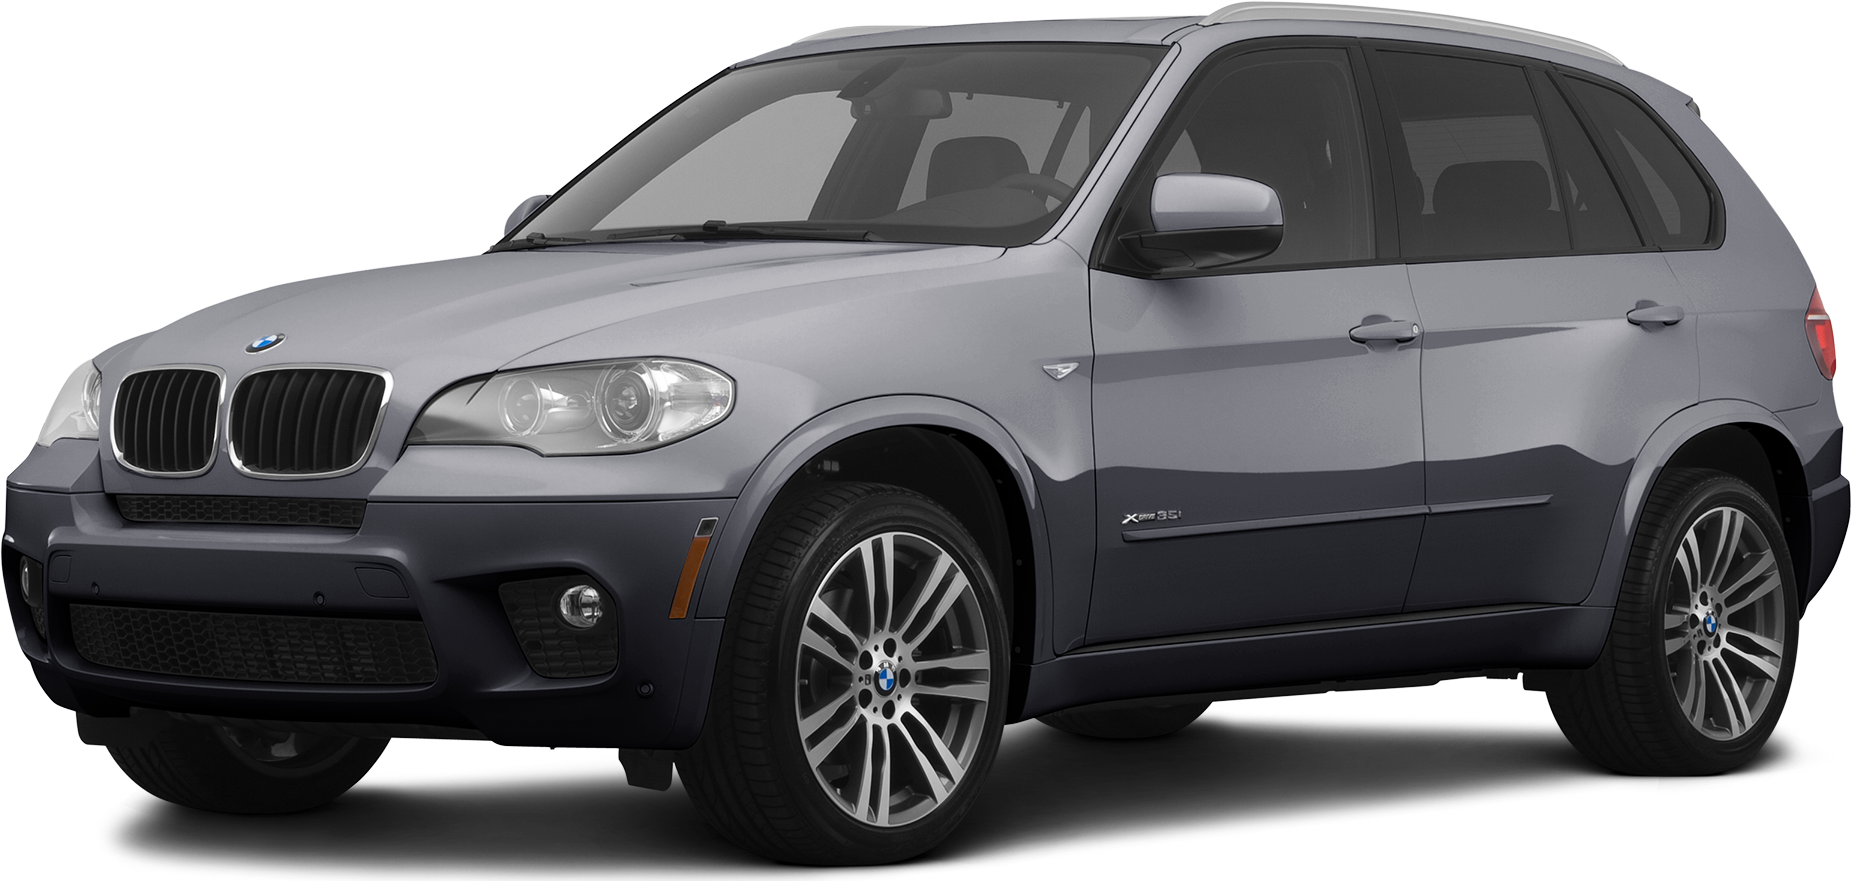 2013 BMW X5 Specs and Features